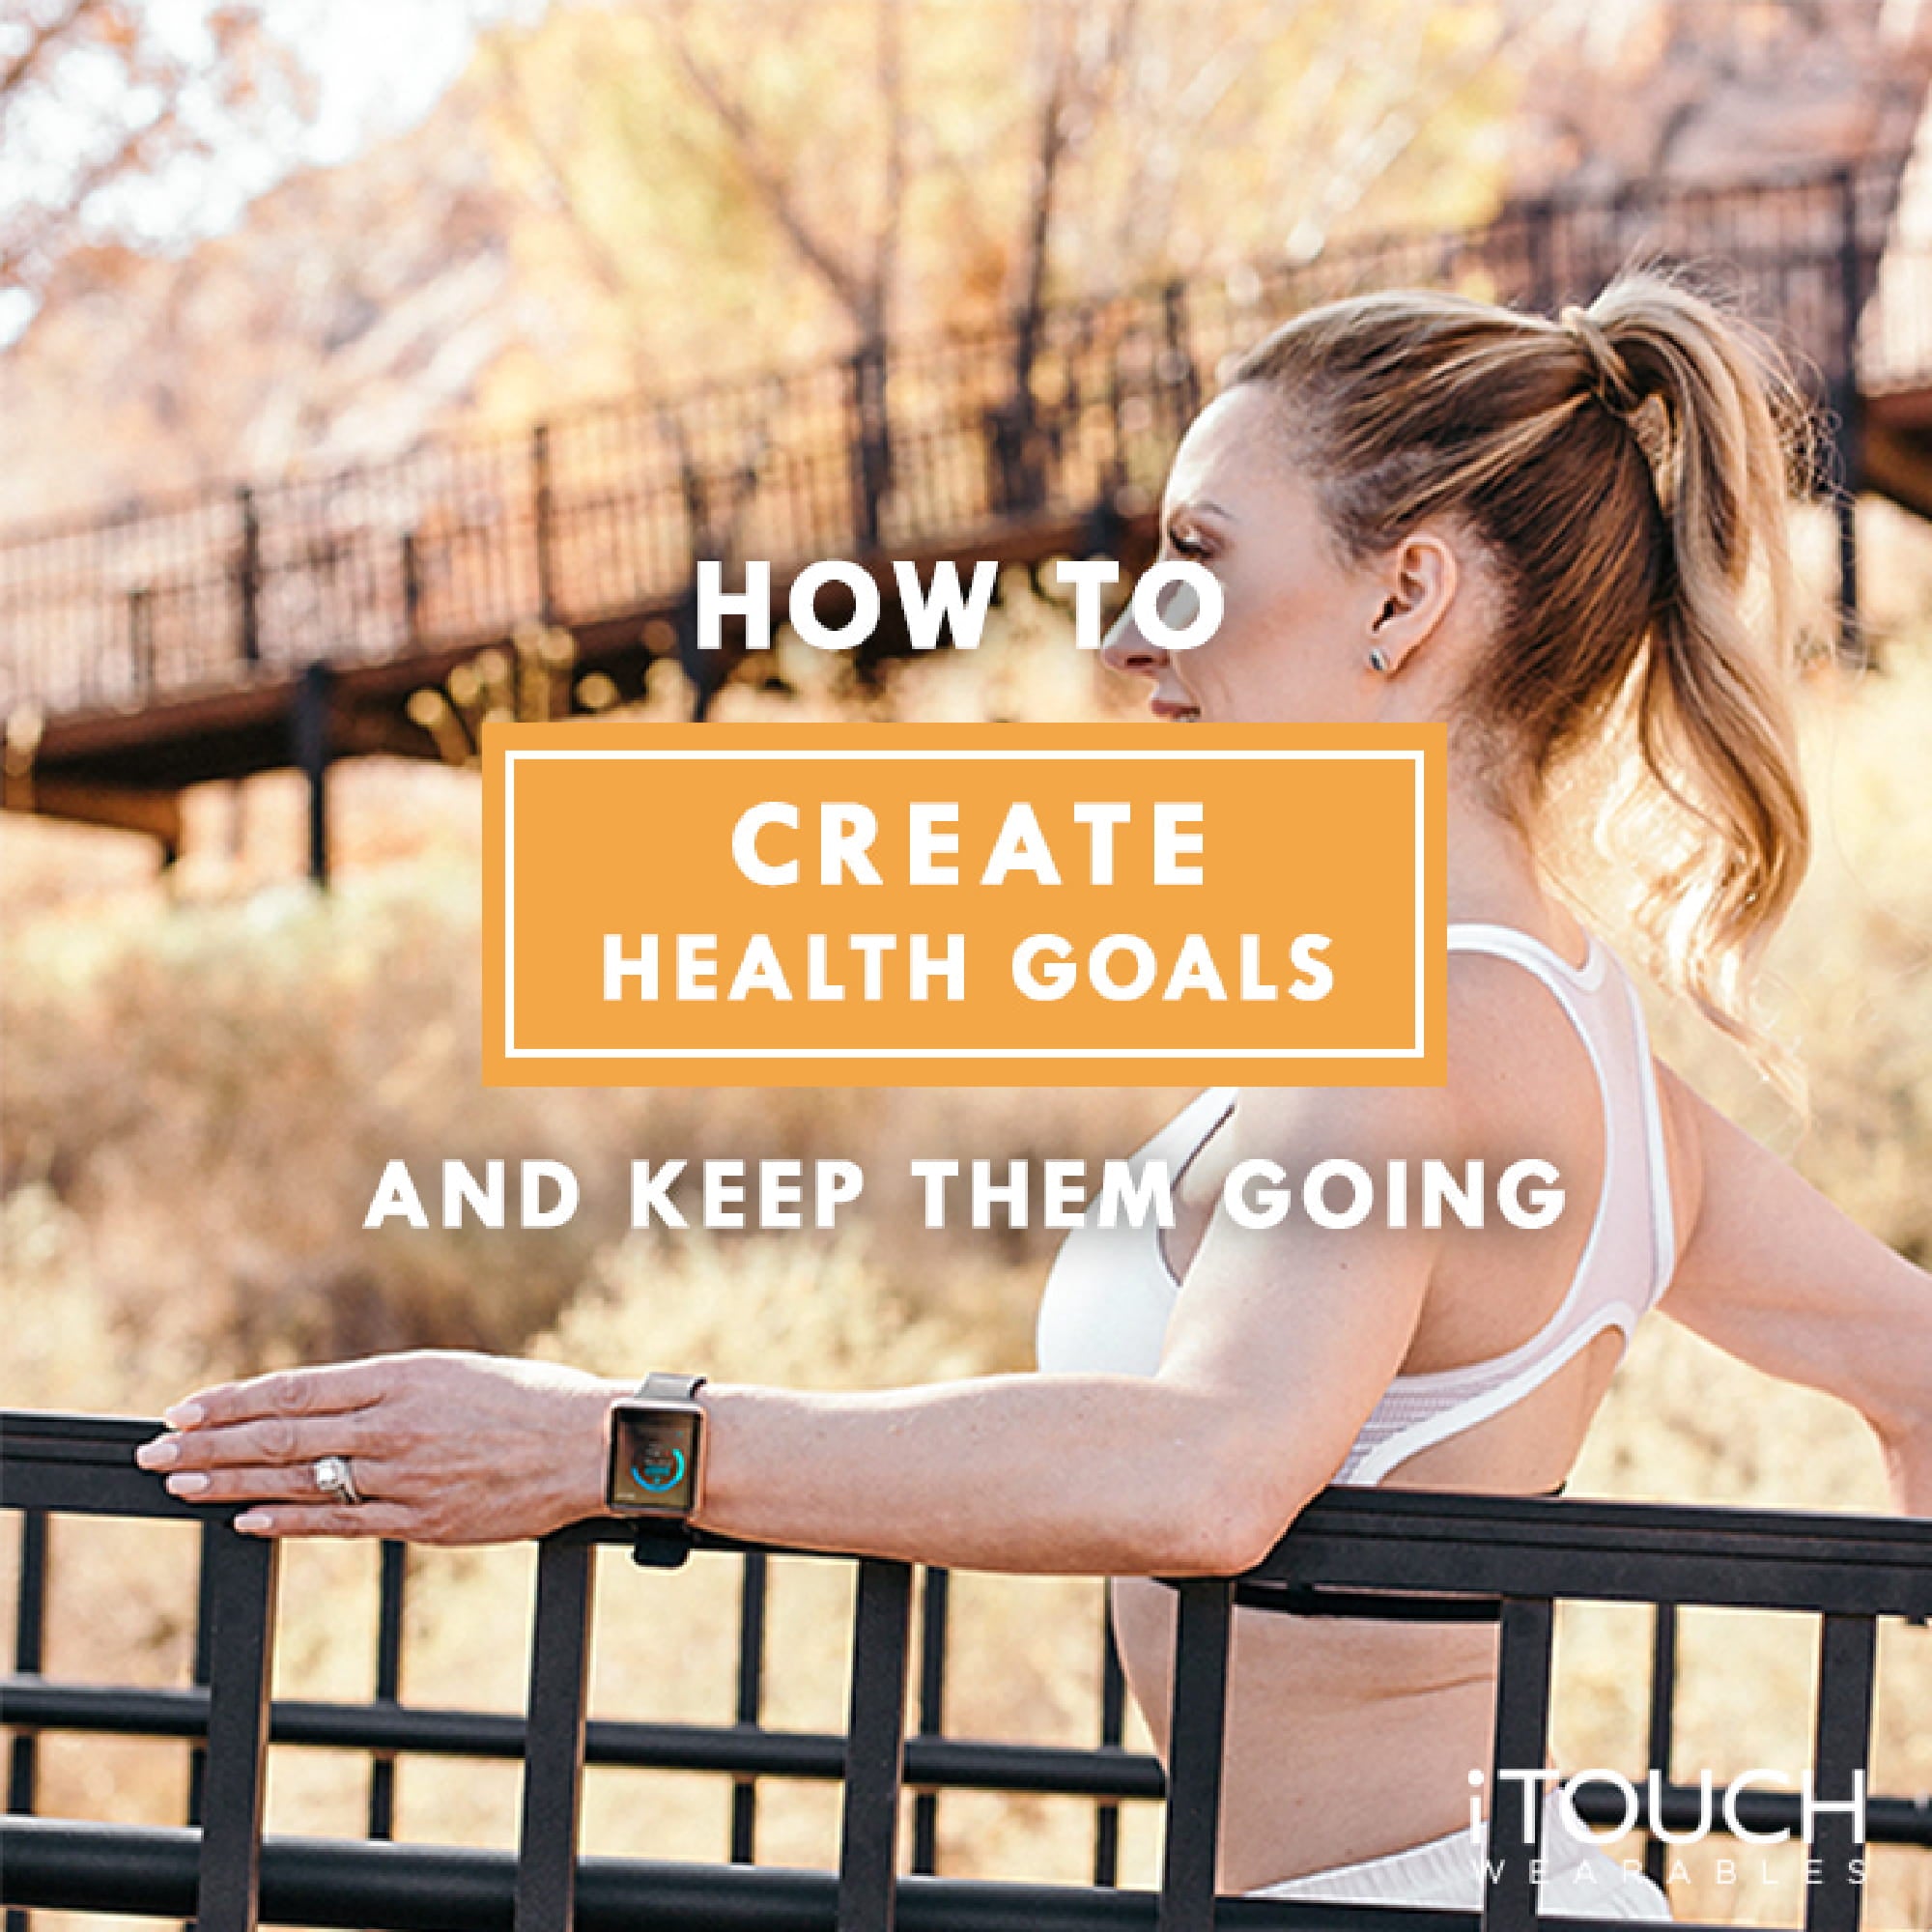 How to Create Health Goals and Keep Them Going